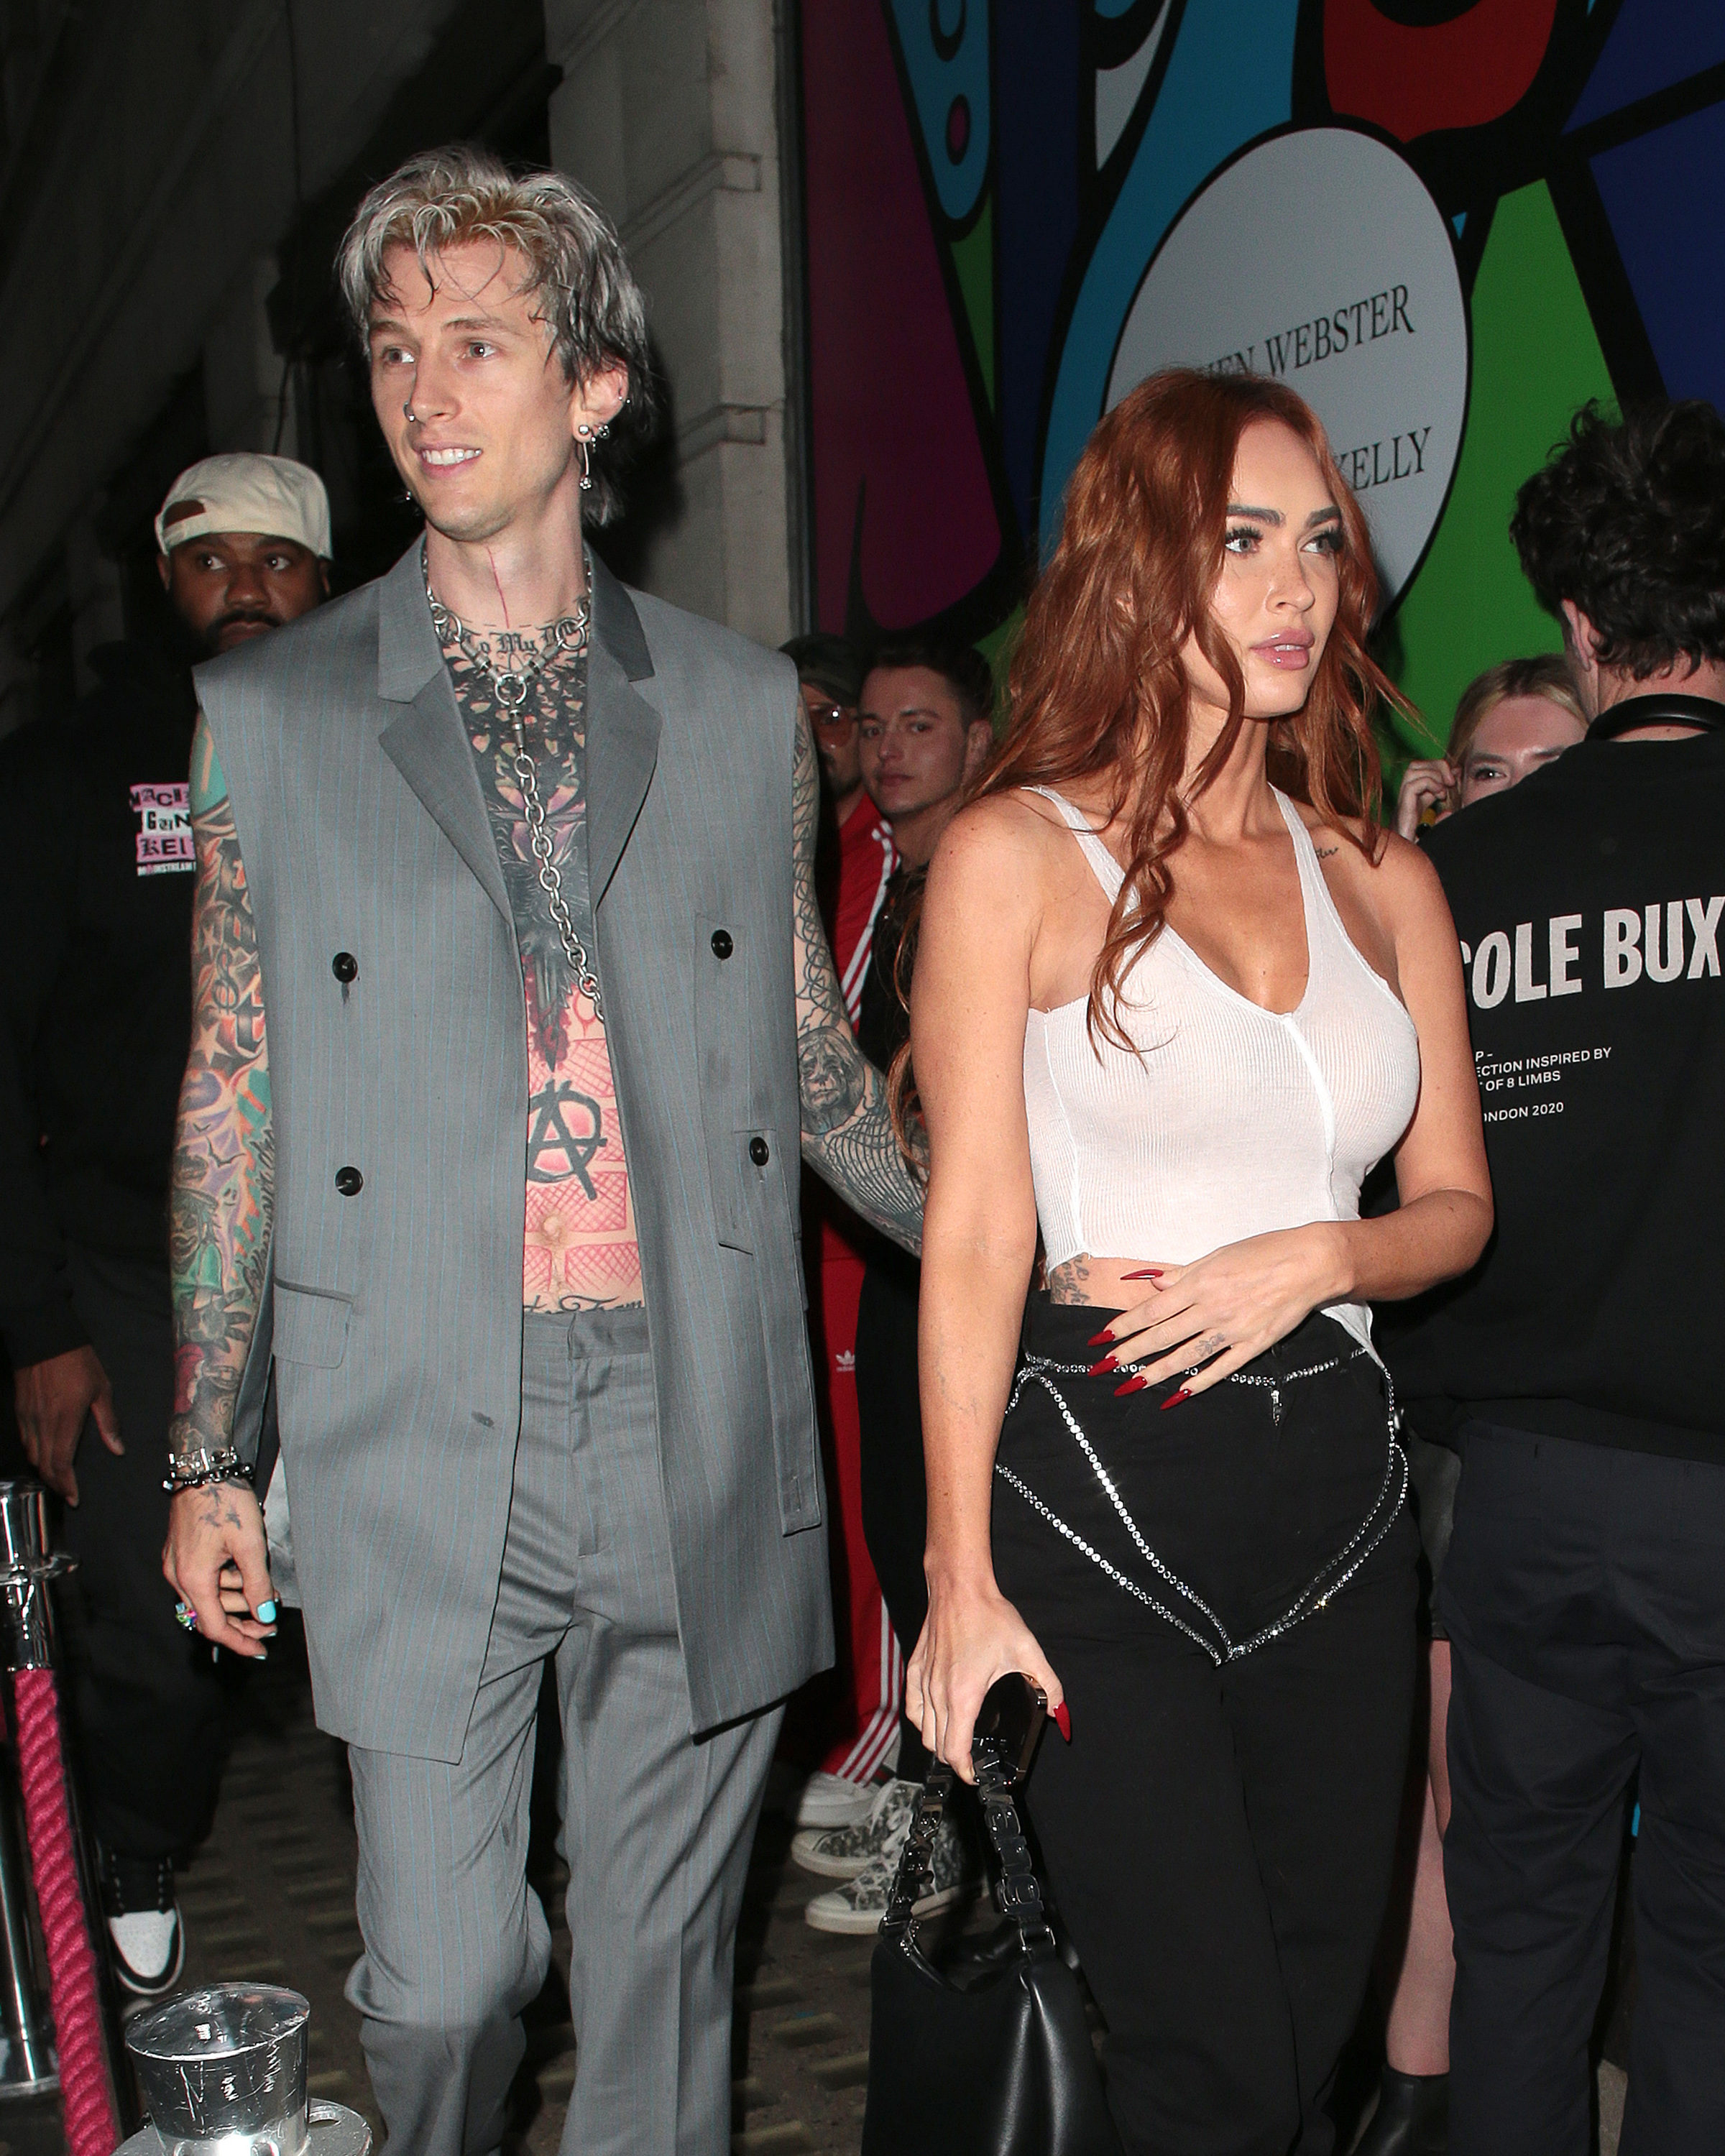 the two at an event, MGK wearing a vest suit with no shirt and Megan in a skirt and sheer top